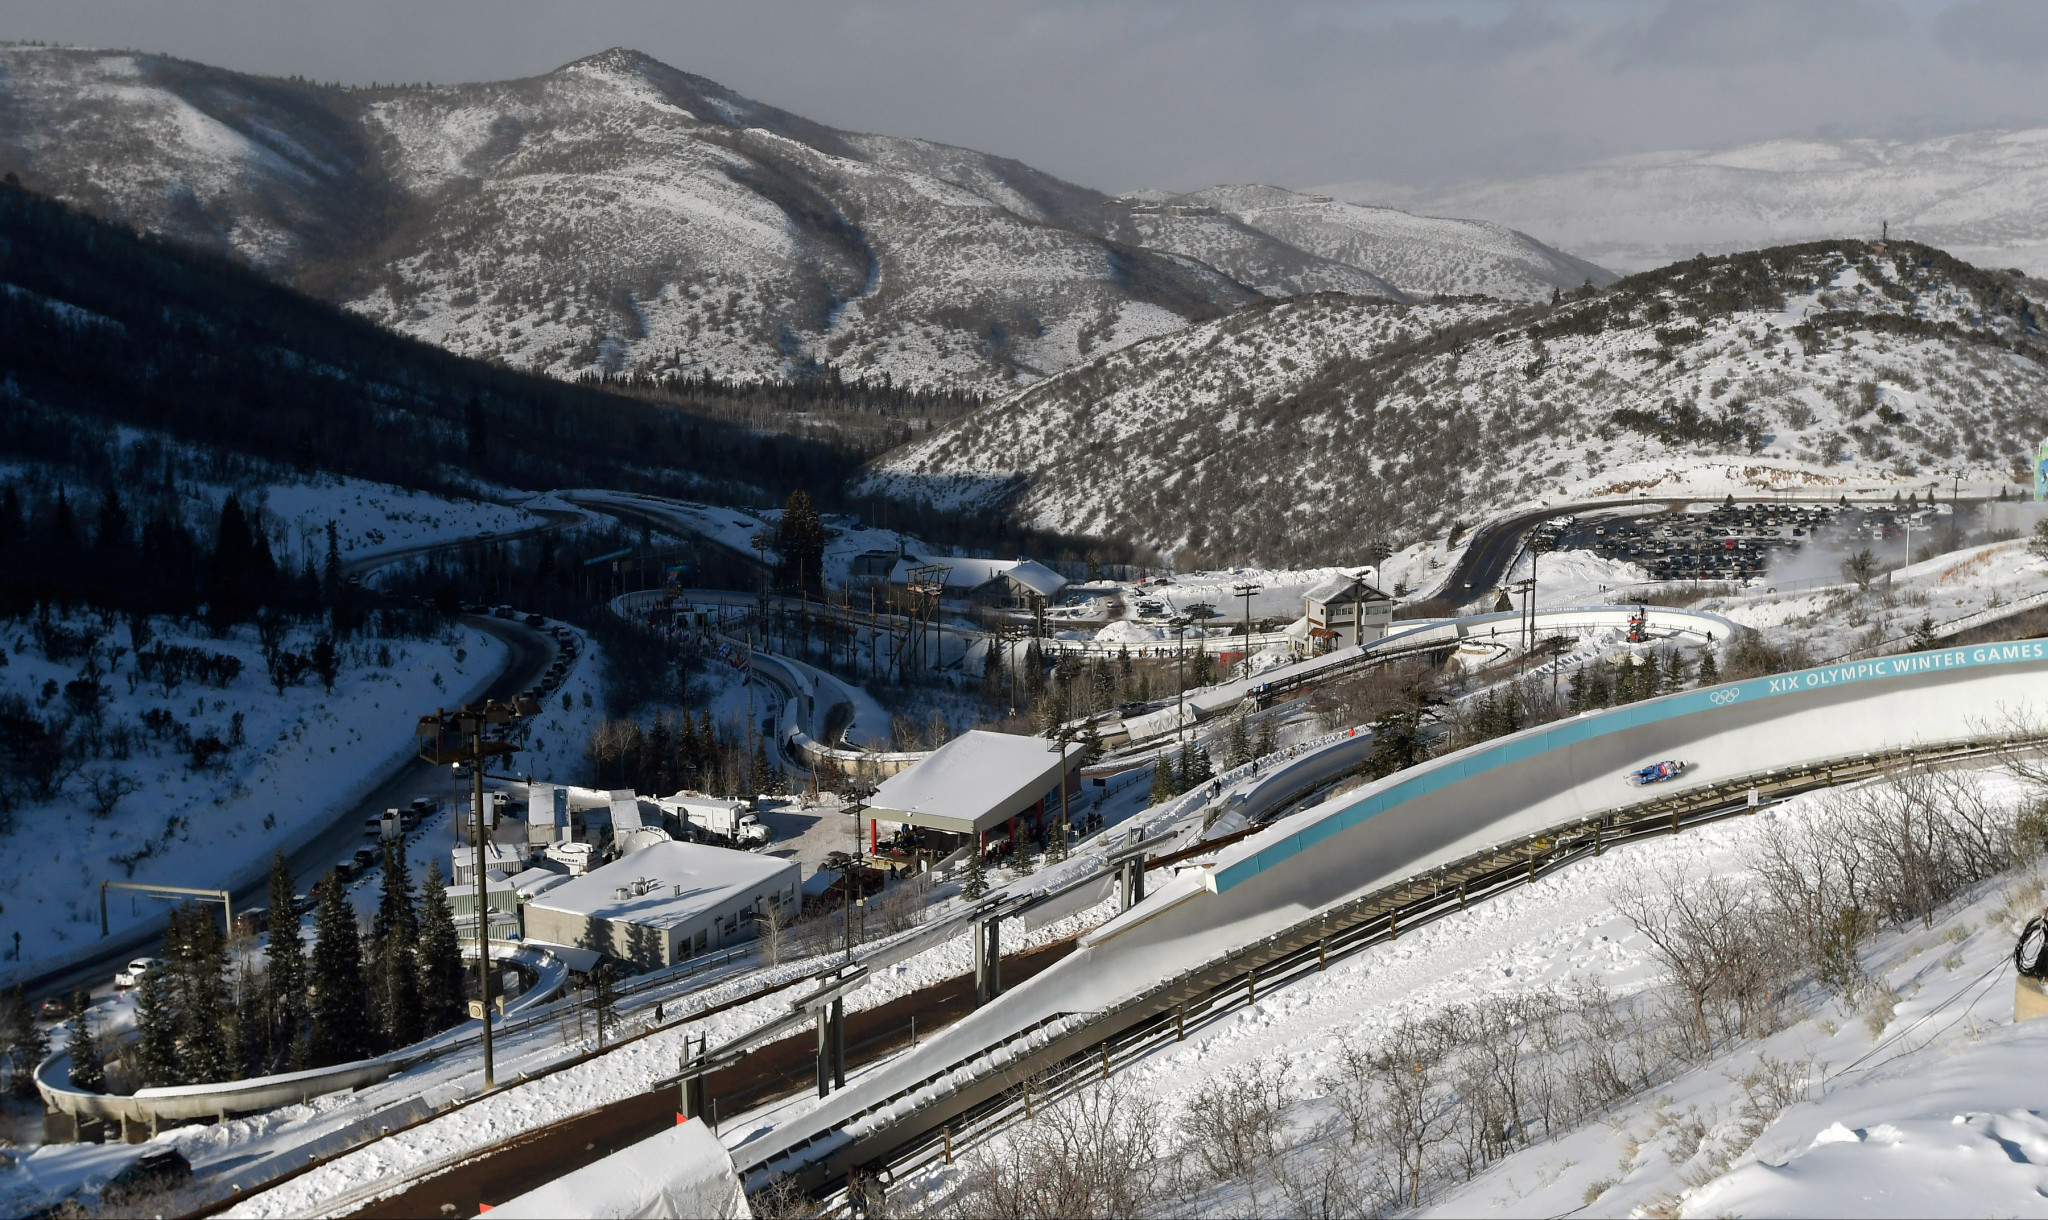 Park City, Utah will again stage the opening event of the FIlL Junior World Cup for 2019-20 ©Getty Images